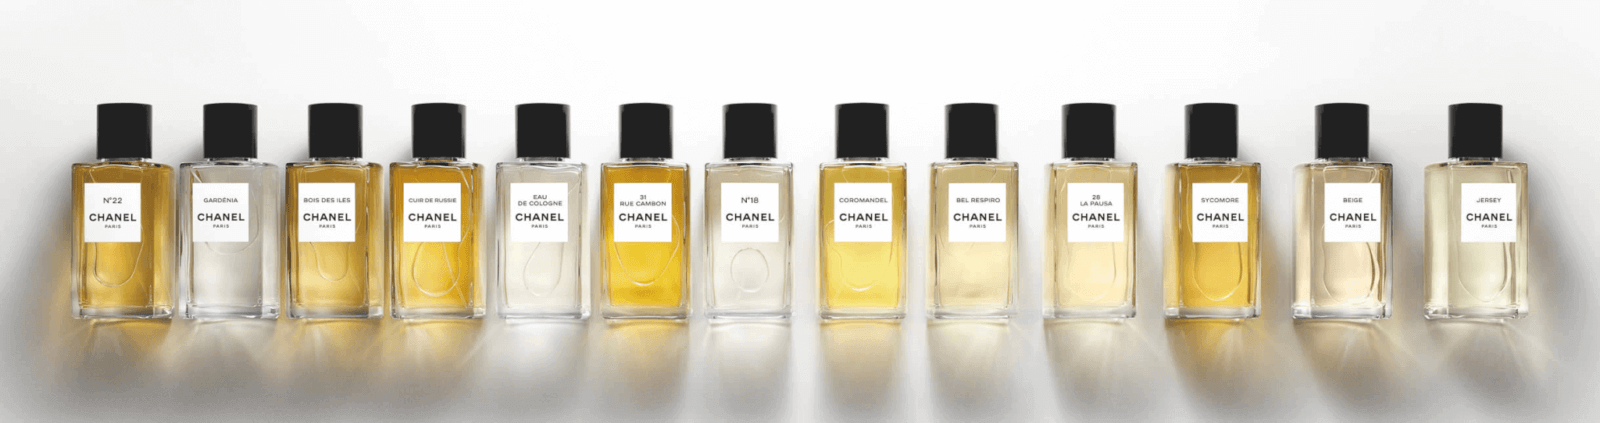 Chanel Fragrance&Beauty Boutique 